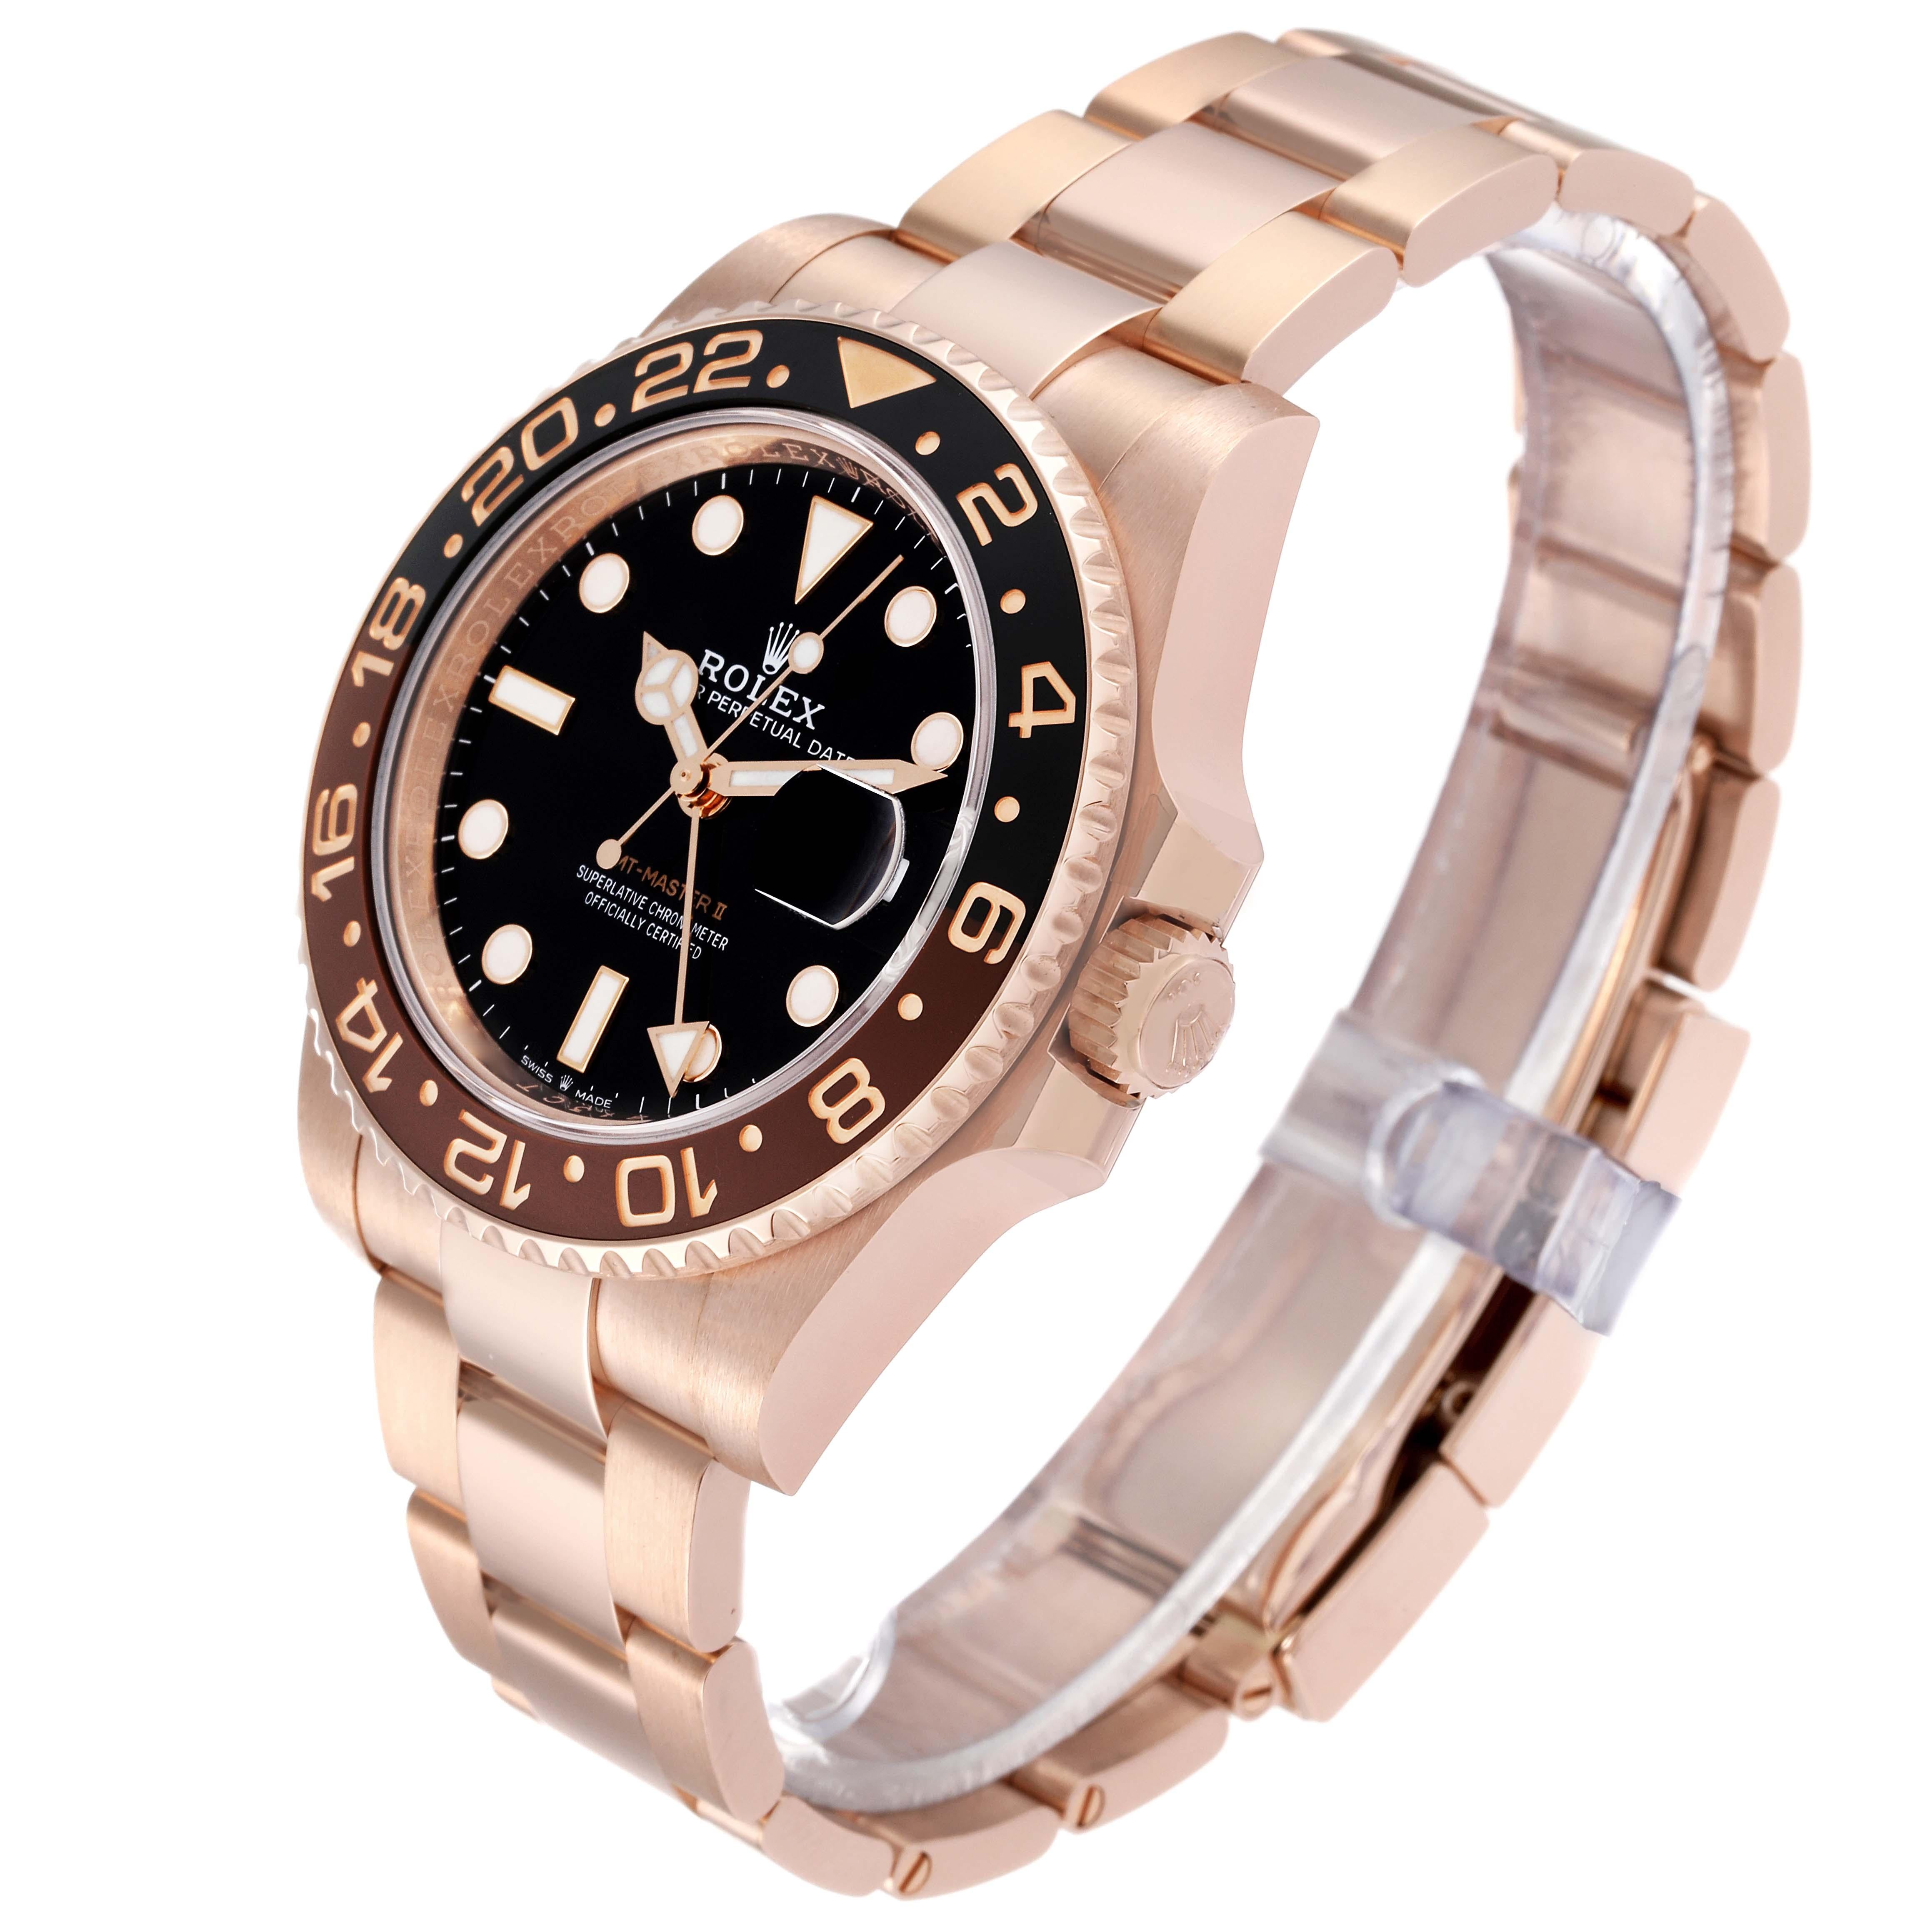 Rolex GMT Master II Black Brown Root Beer Rose Gold Mens Watch 126715 Box Card 3